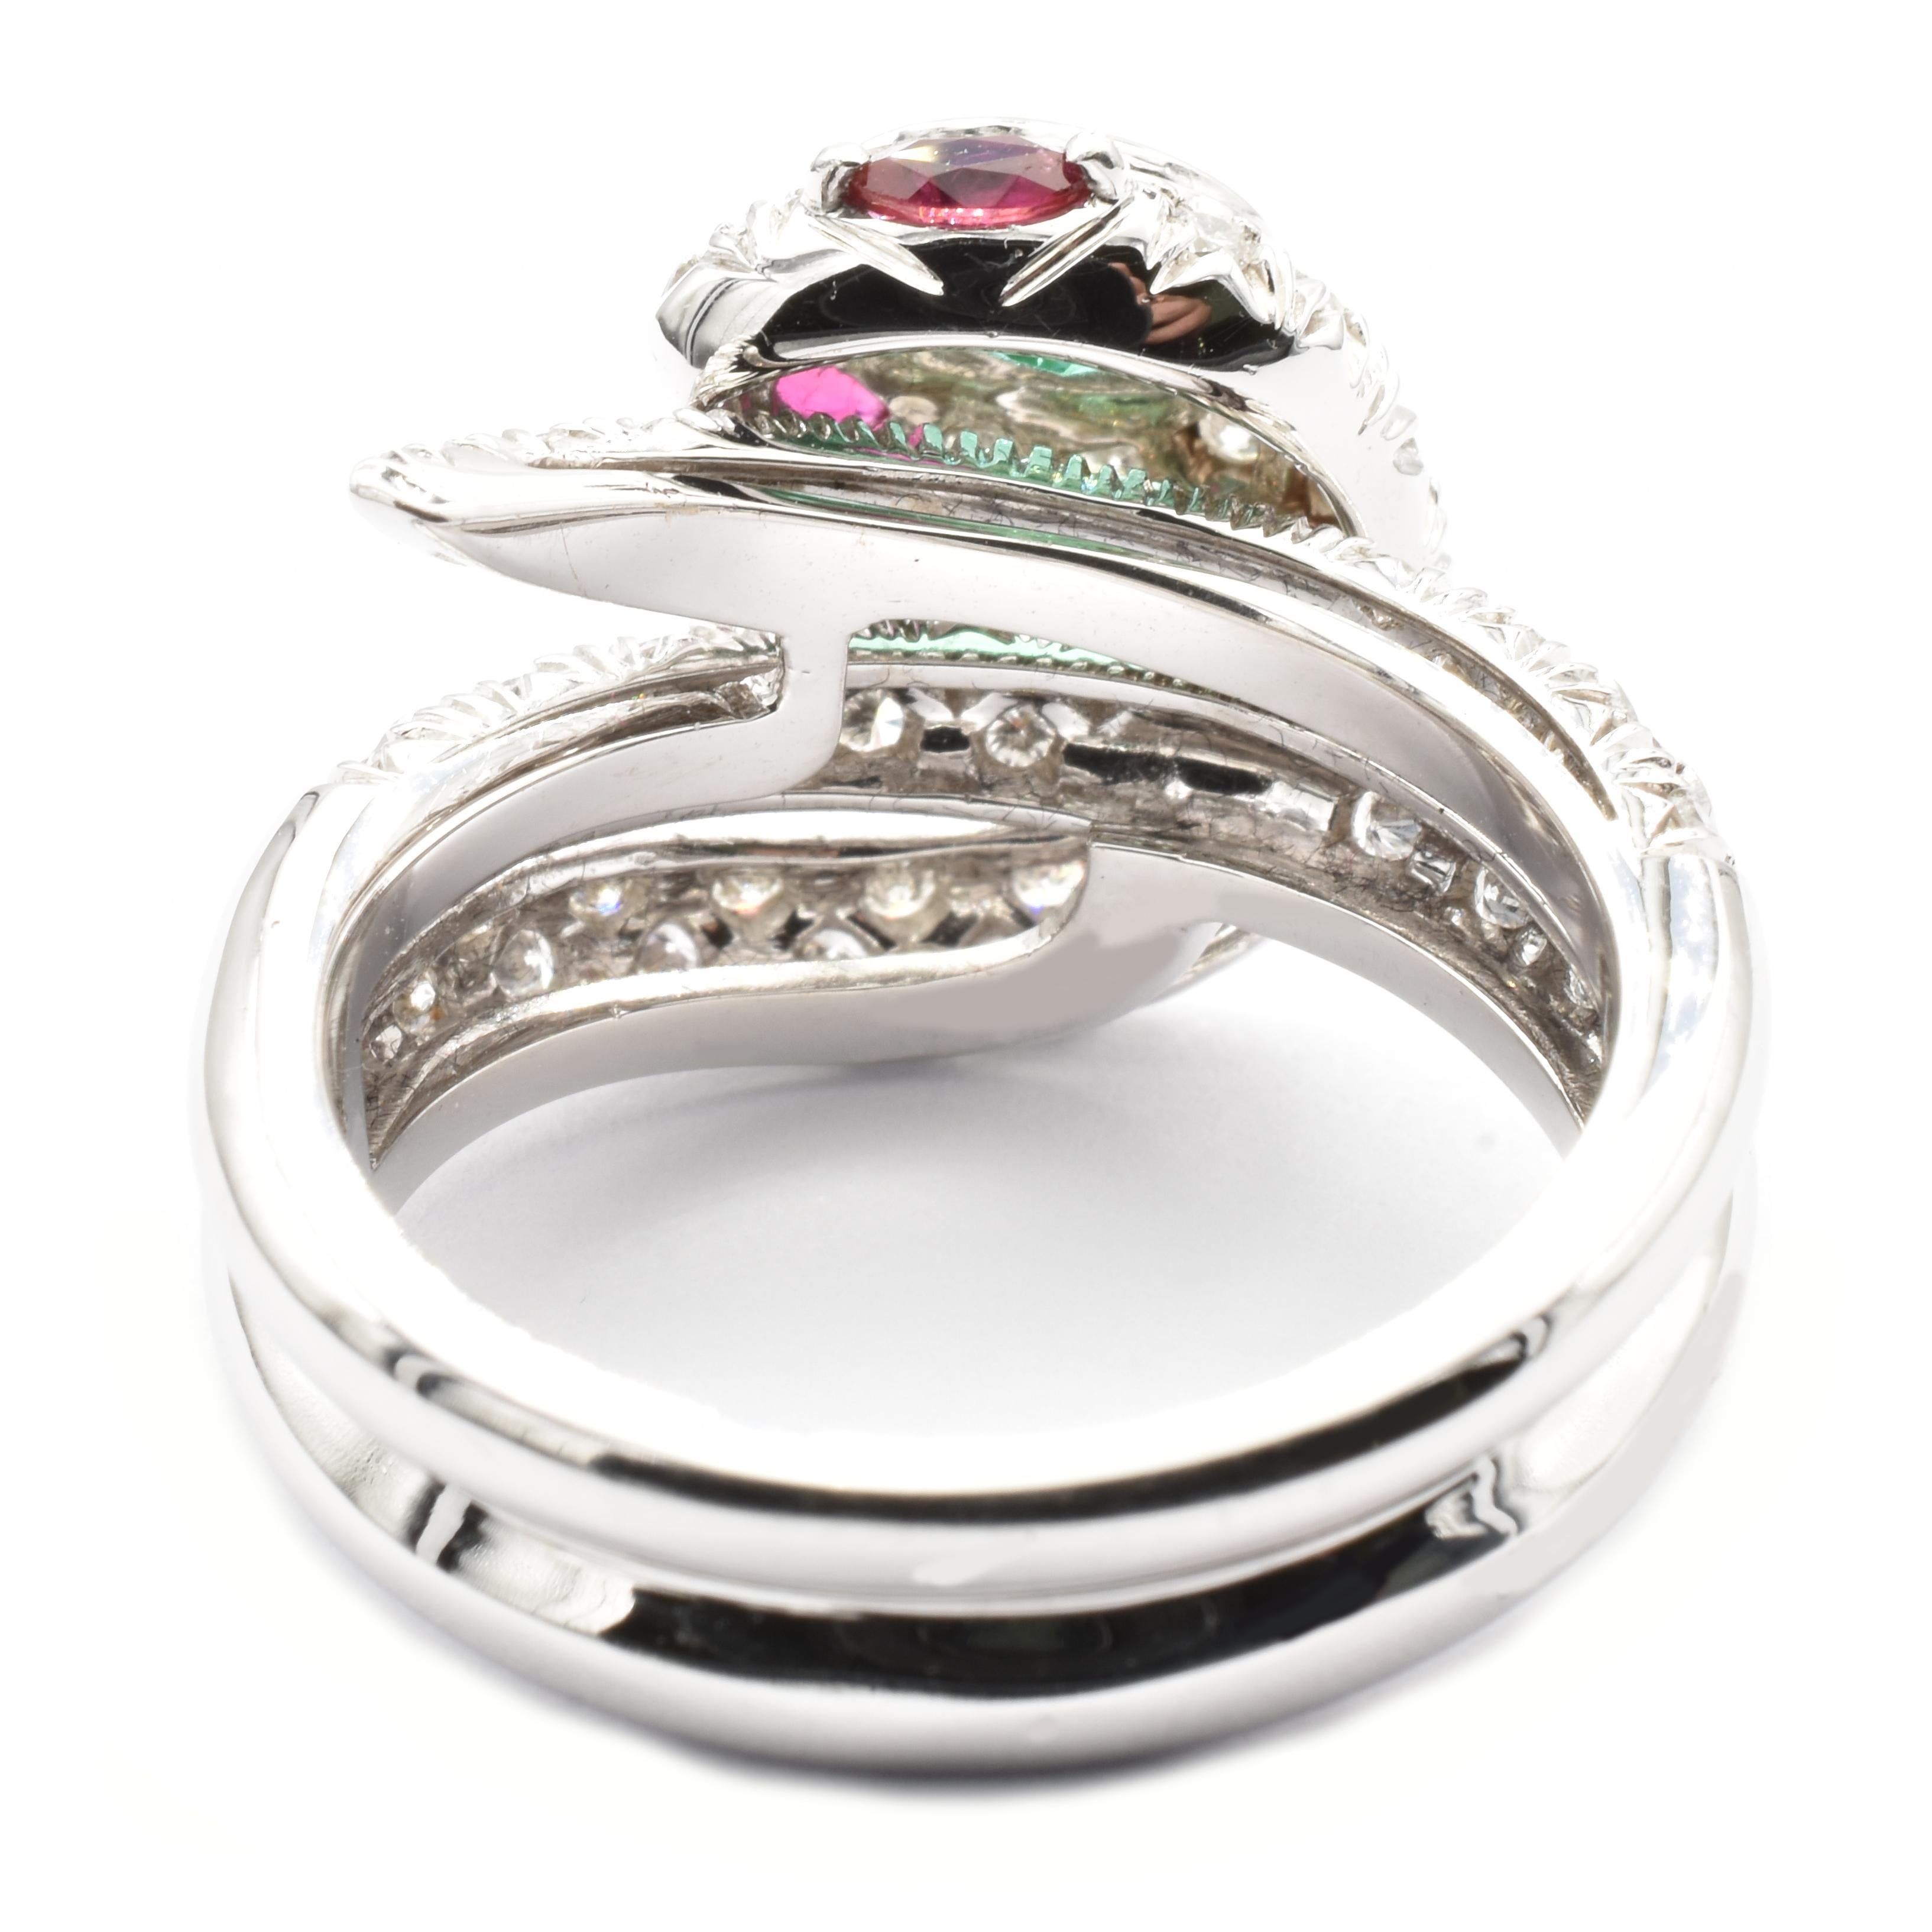 Women's Emerald, Rubies and Diamonds White Gold Snake Ring Made in Italy For Sale